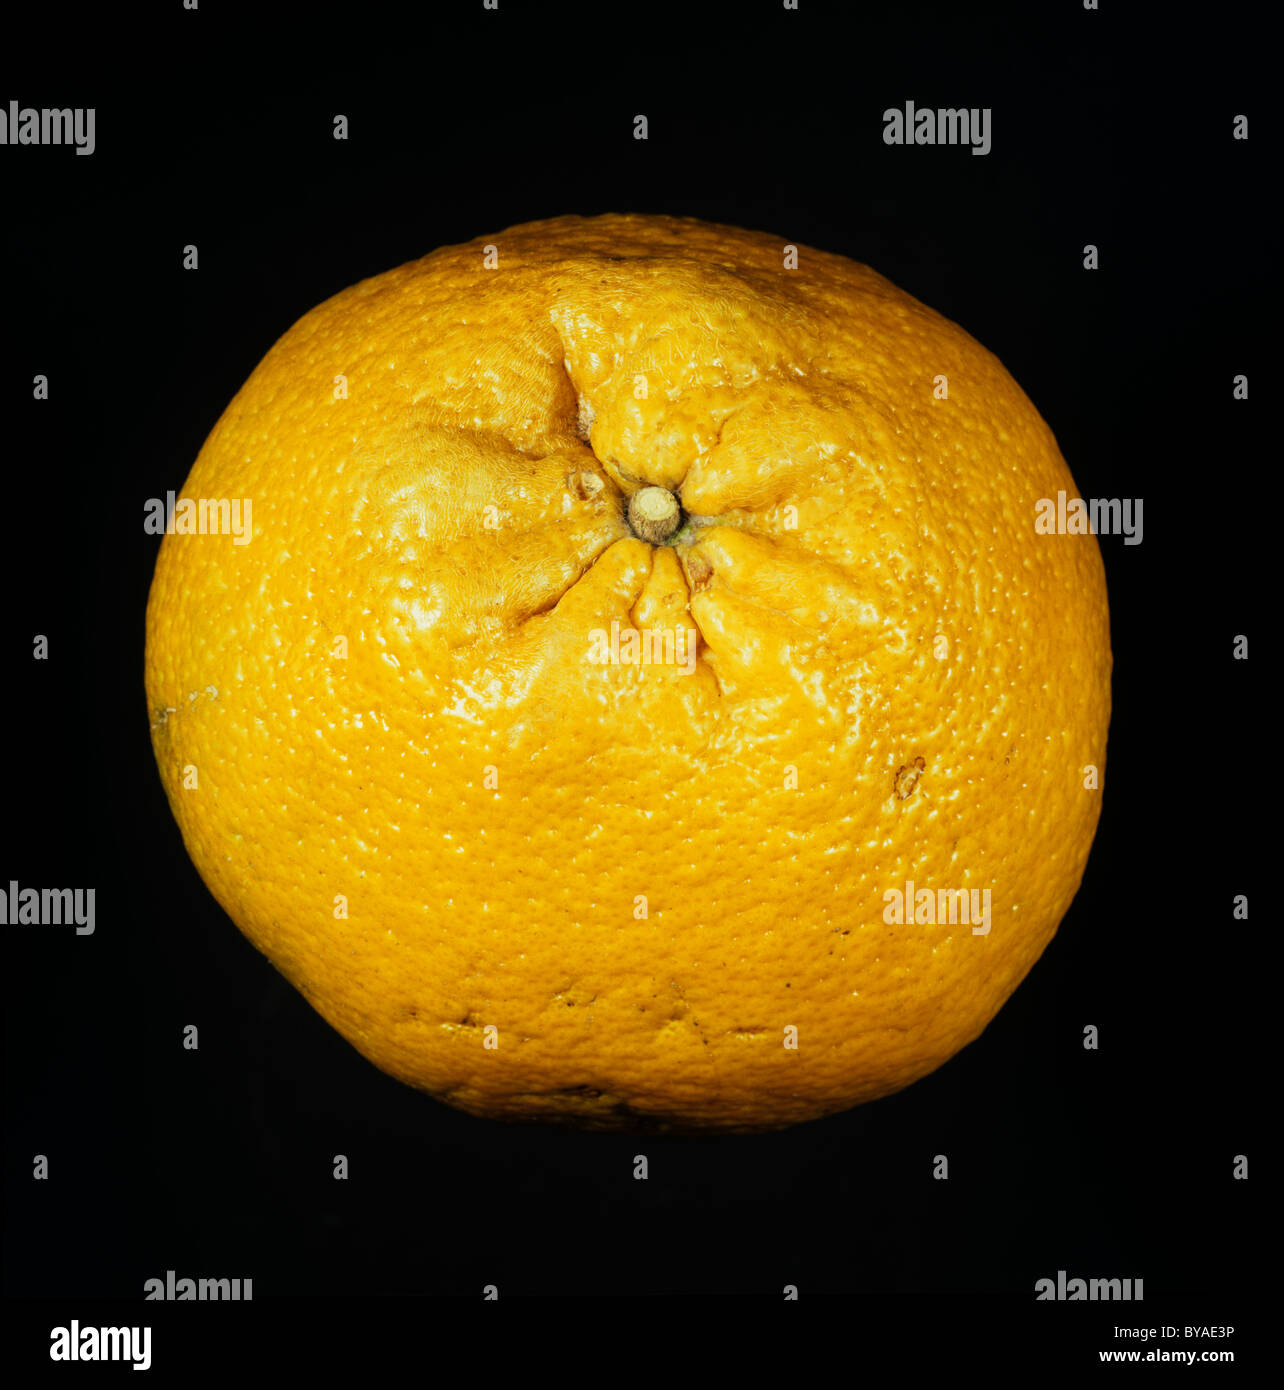 Whole ugli fruit, a cross between a tangerine and a grapefruit Stock Photo